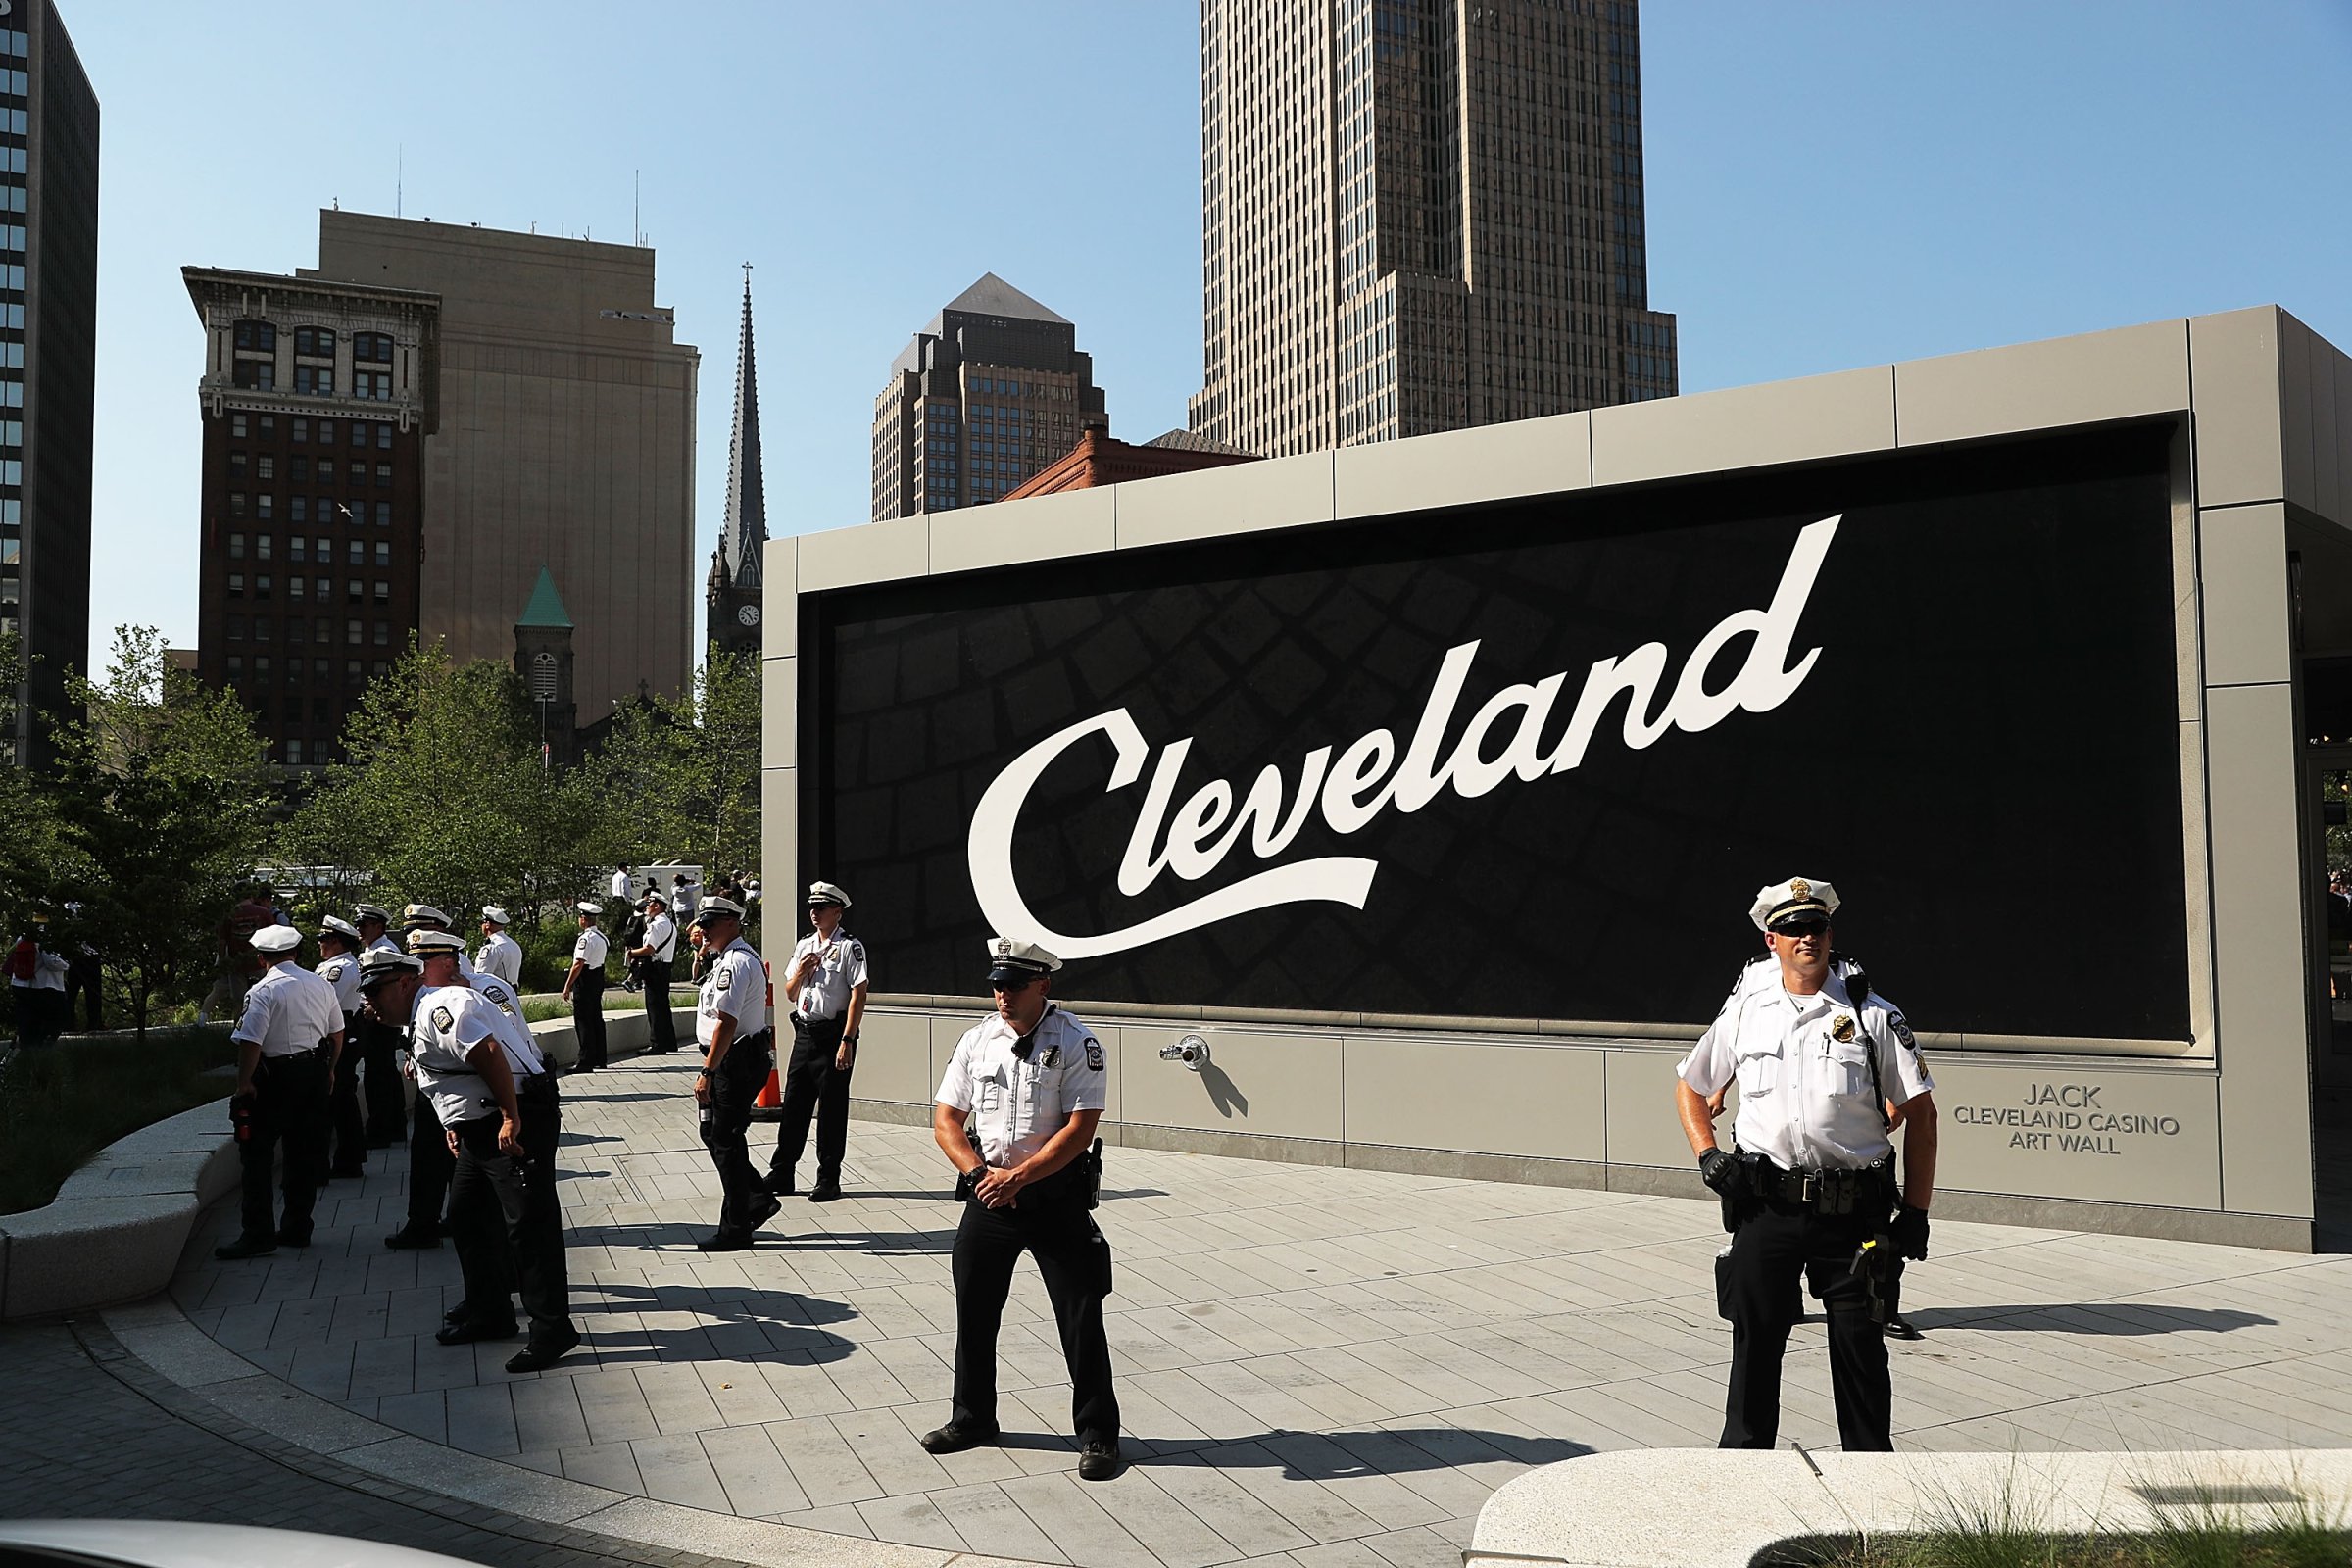 Police stand guard near the site of the Republican National Convention in downtown Cleveland, July 19, 2016.